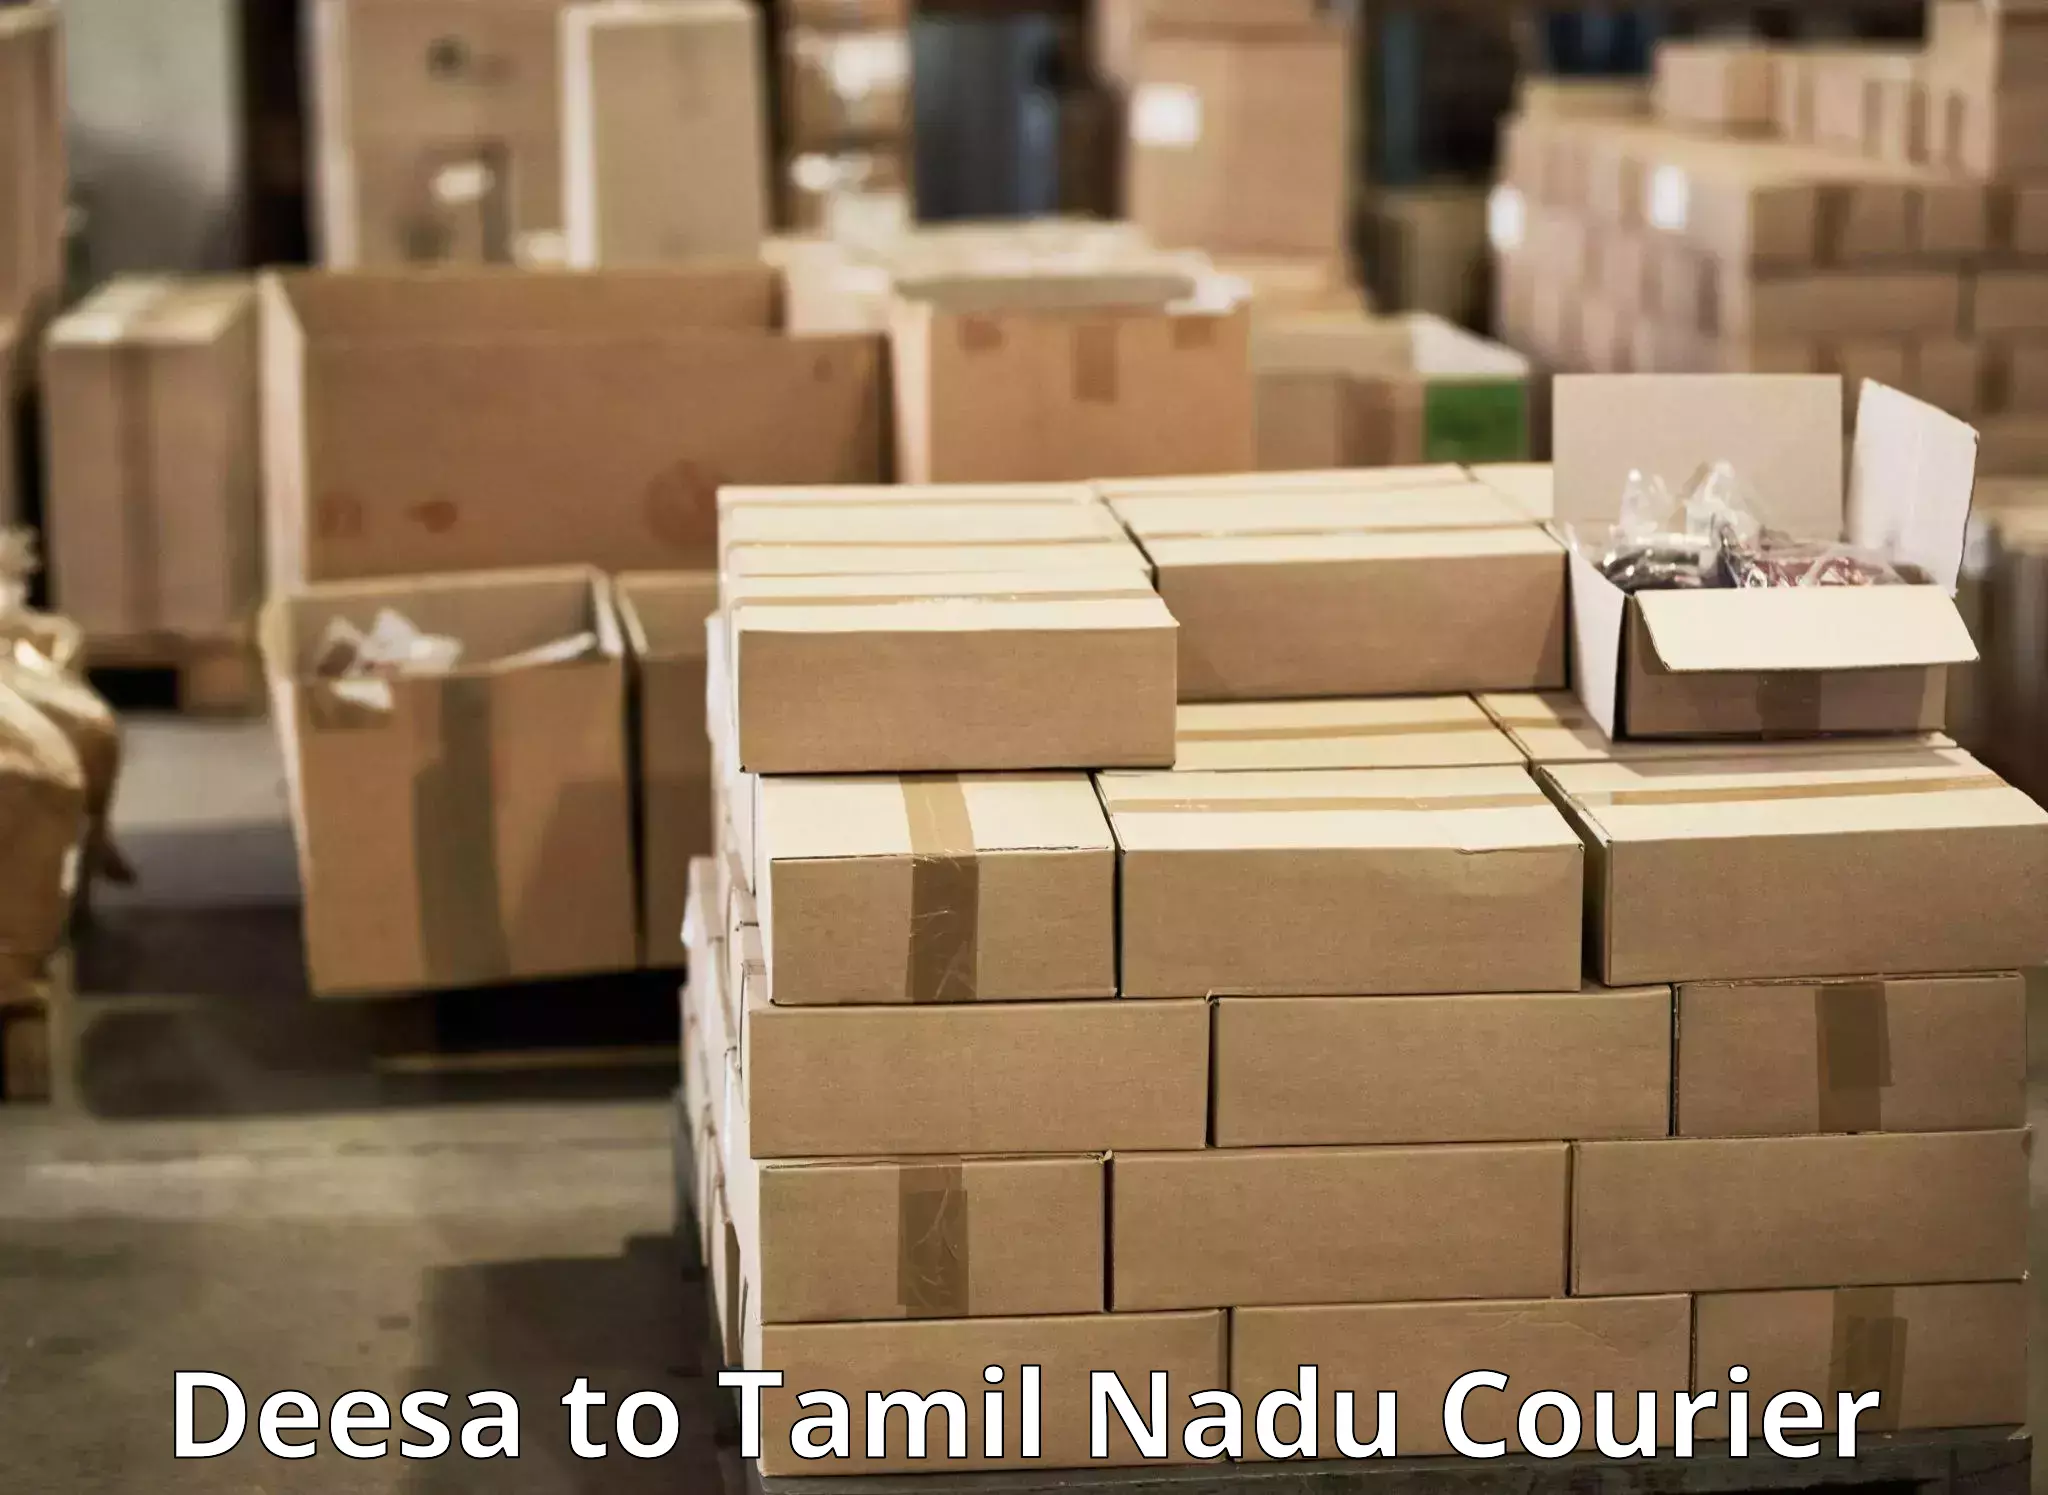 Global shipping networks in Deesa to Karur